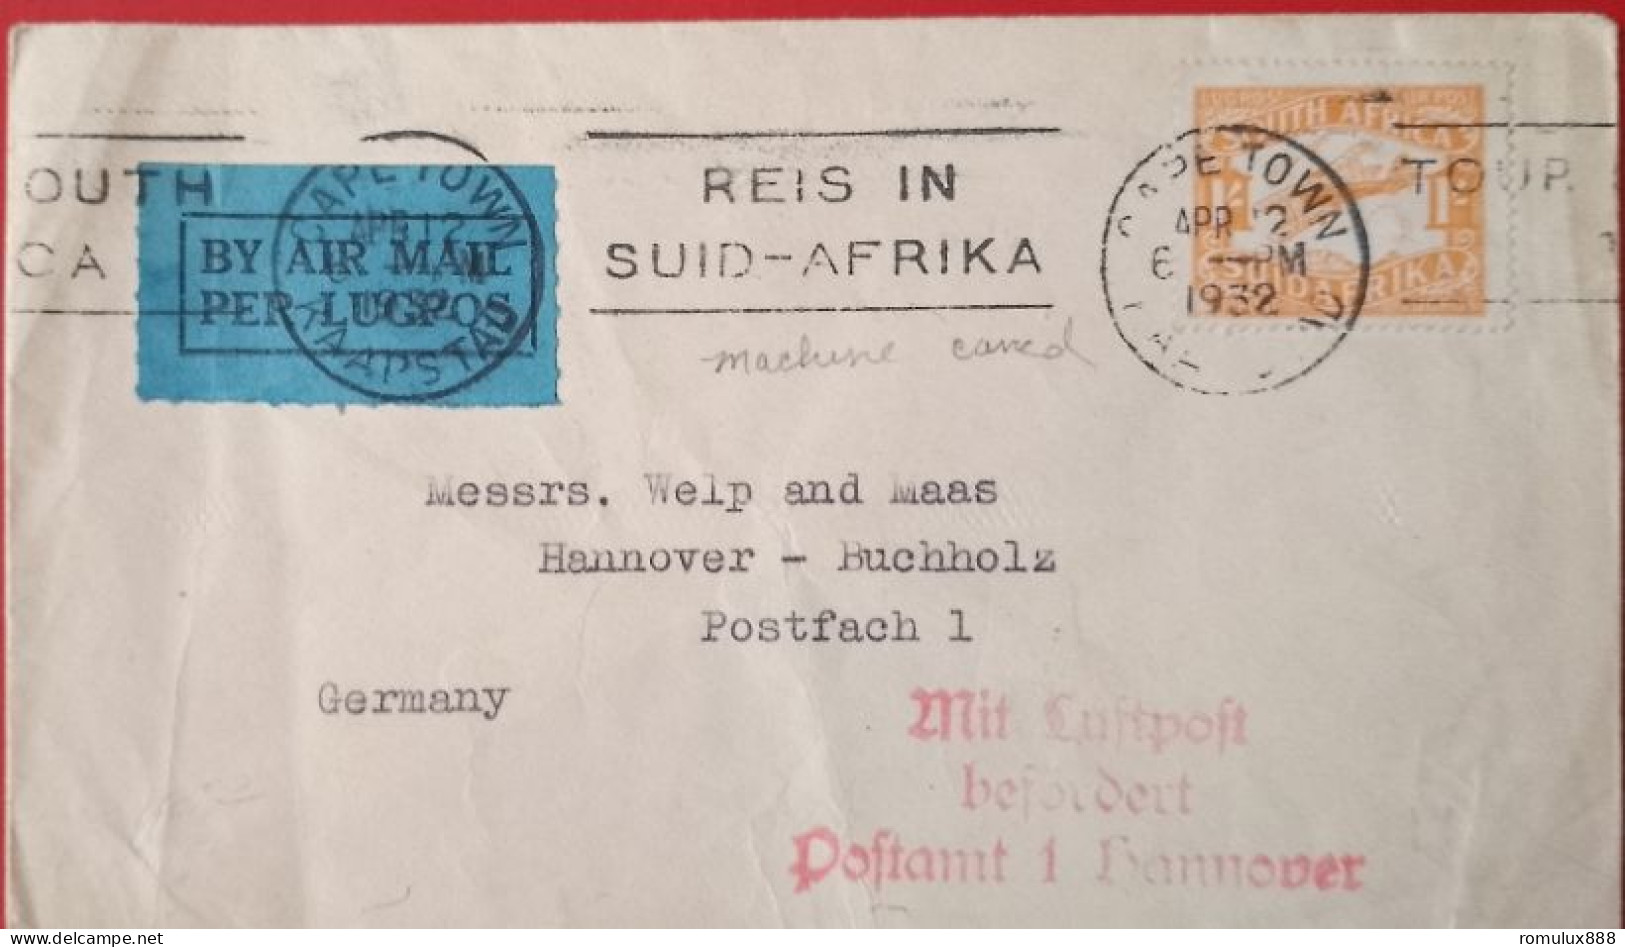 IMPERIAL AIRWAYS 1932 CAPETOWN TO HANNOVER FLIGHT COVER - Luchtpost